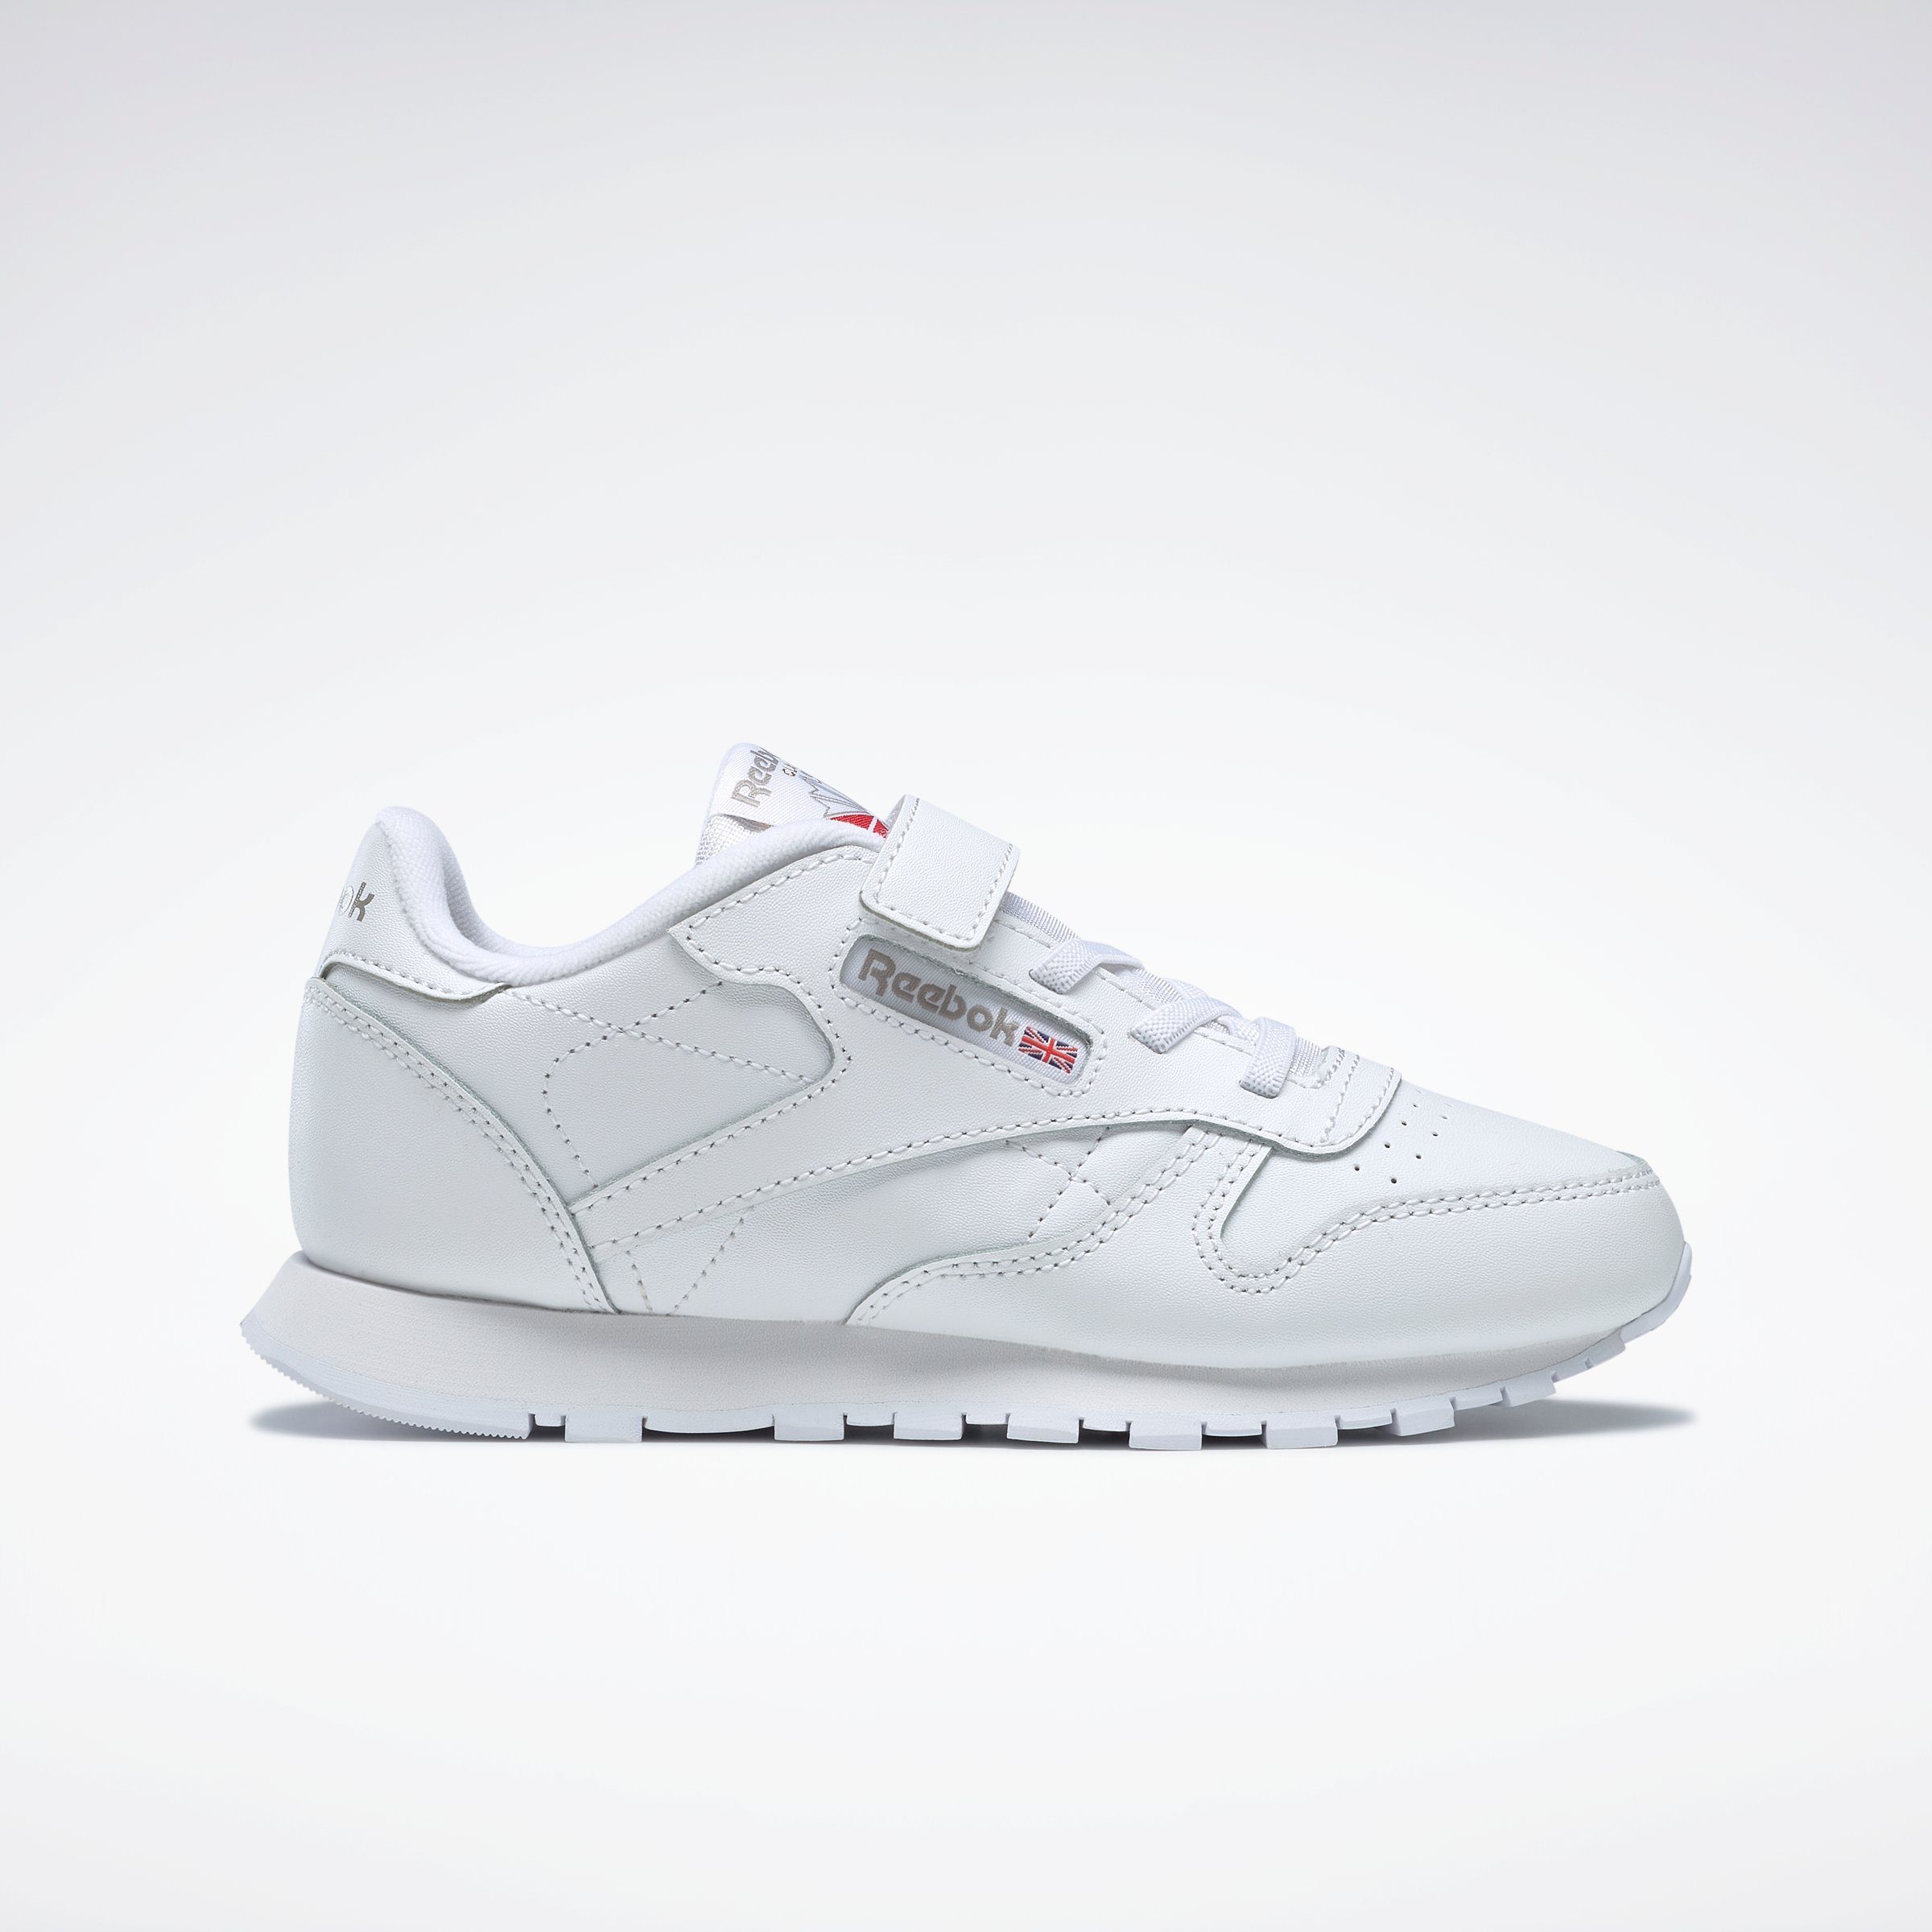 Sneaker LEATHER Reebok CLASSIC Classic SHOES